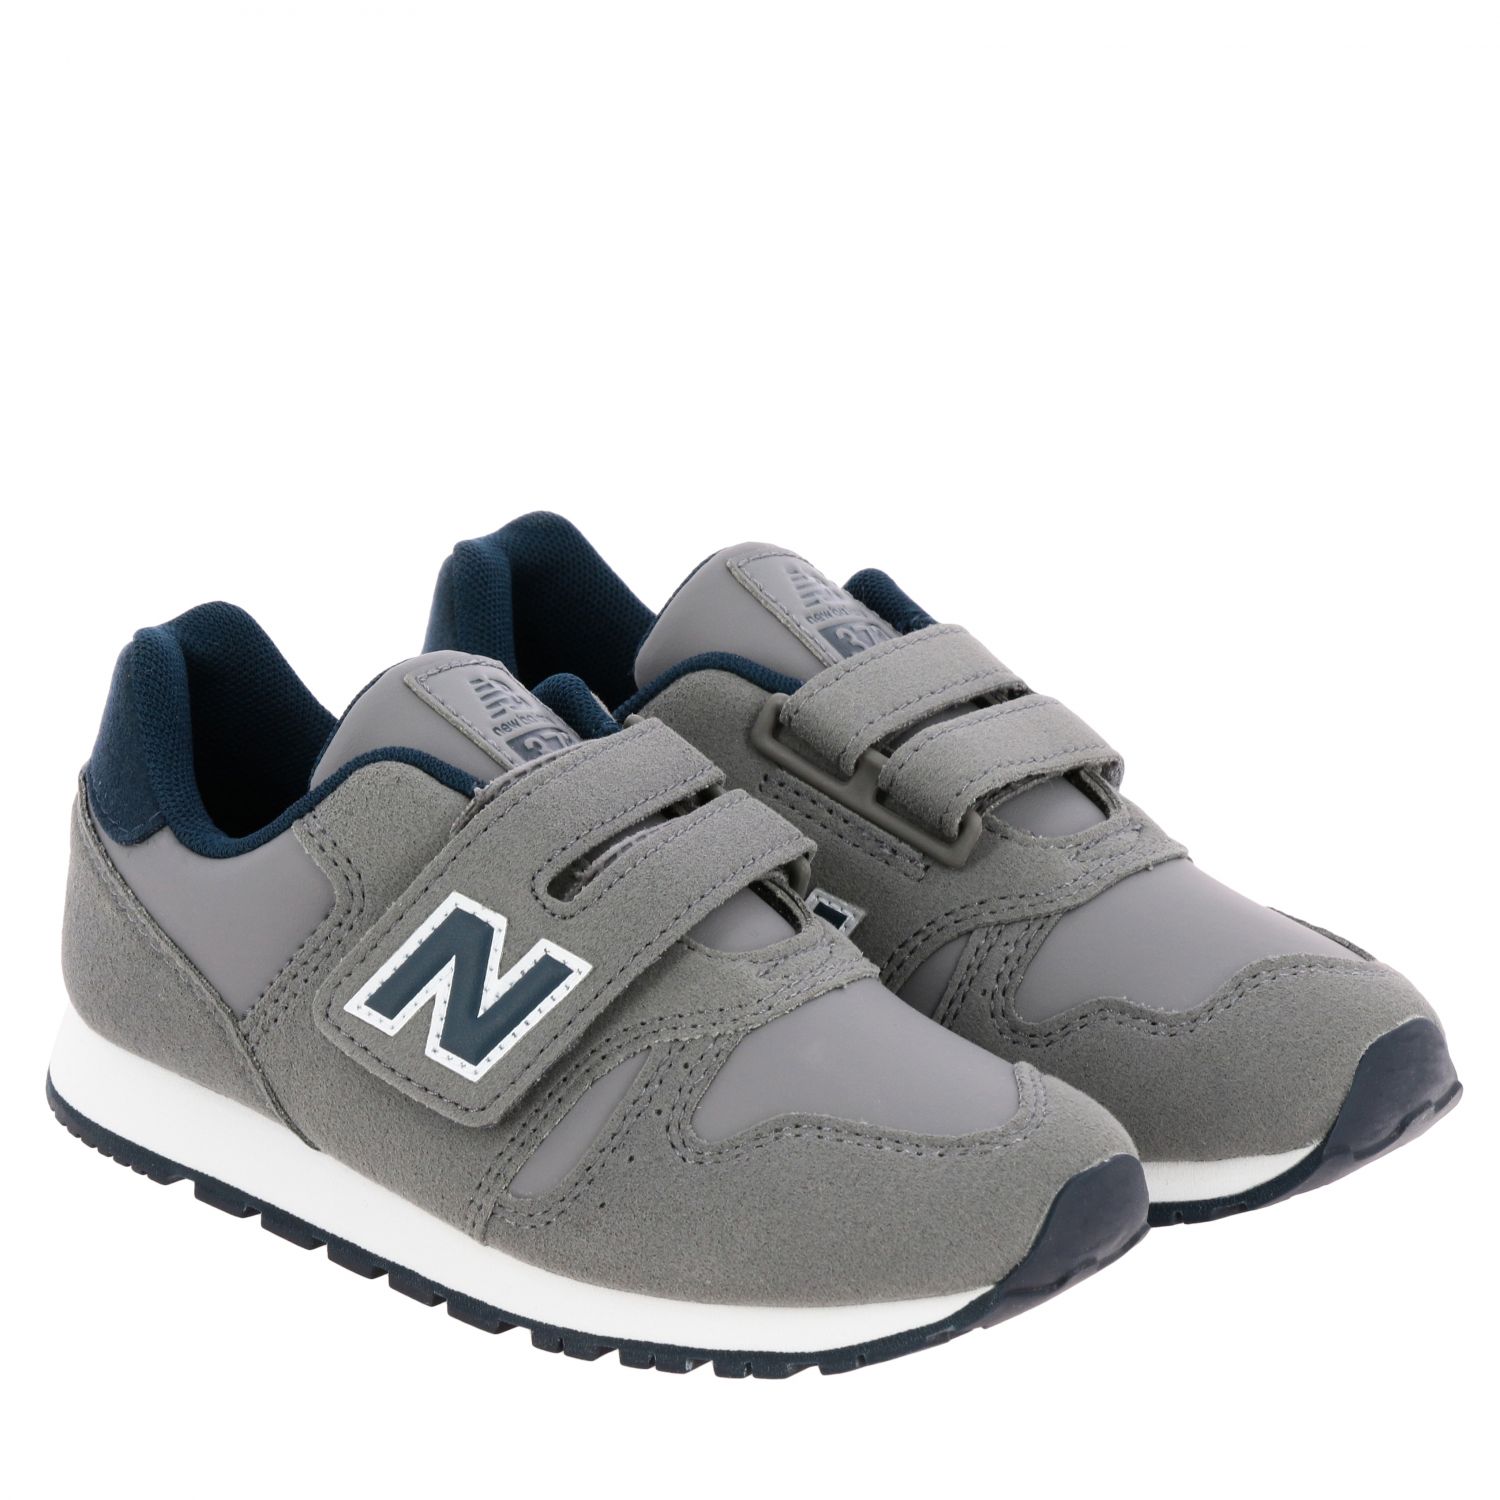 Velcro New Balance Top Sellers, UP TO 53% OFF